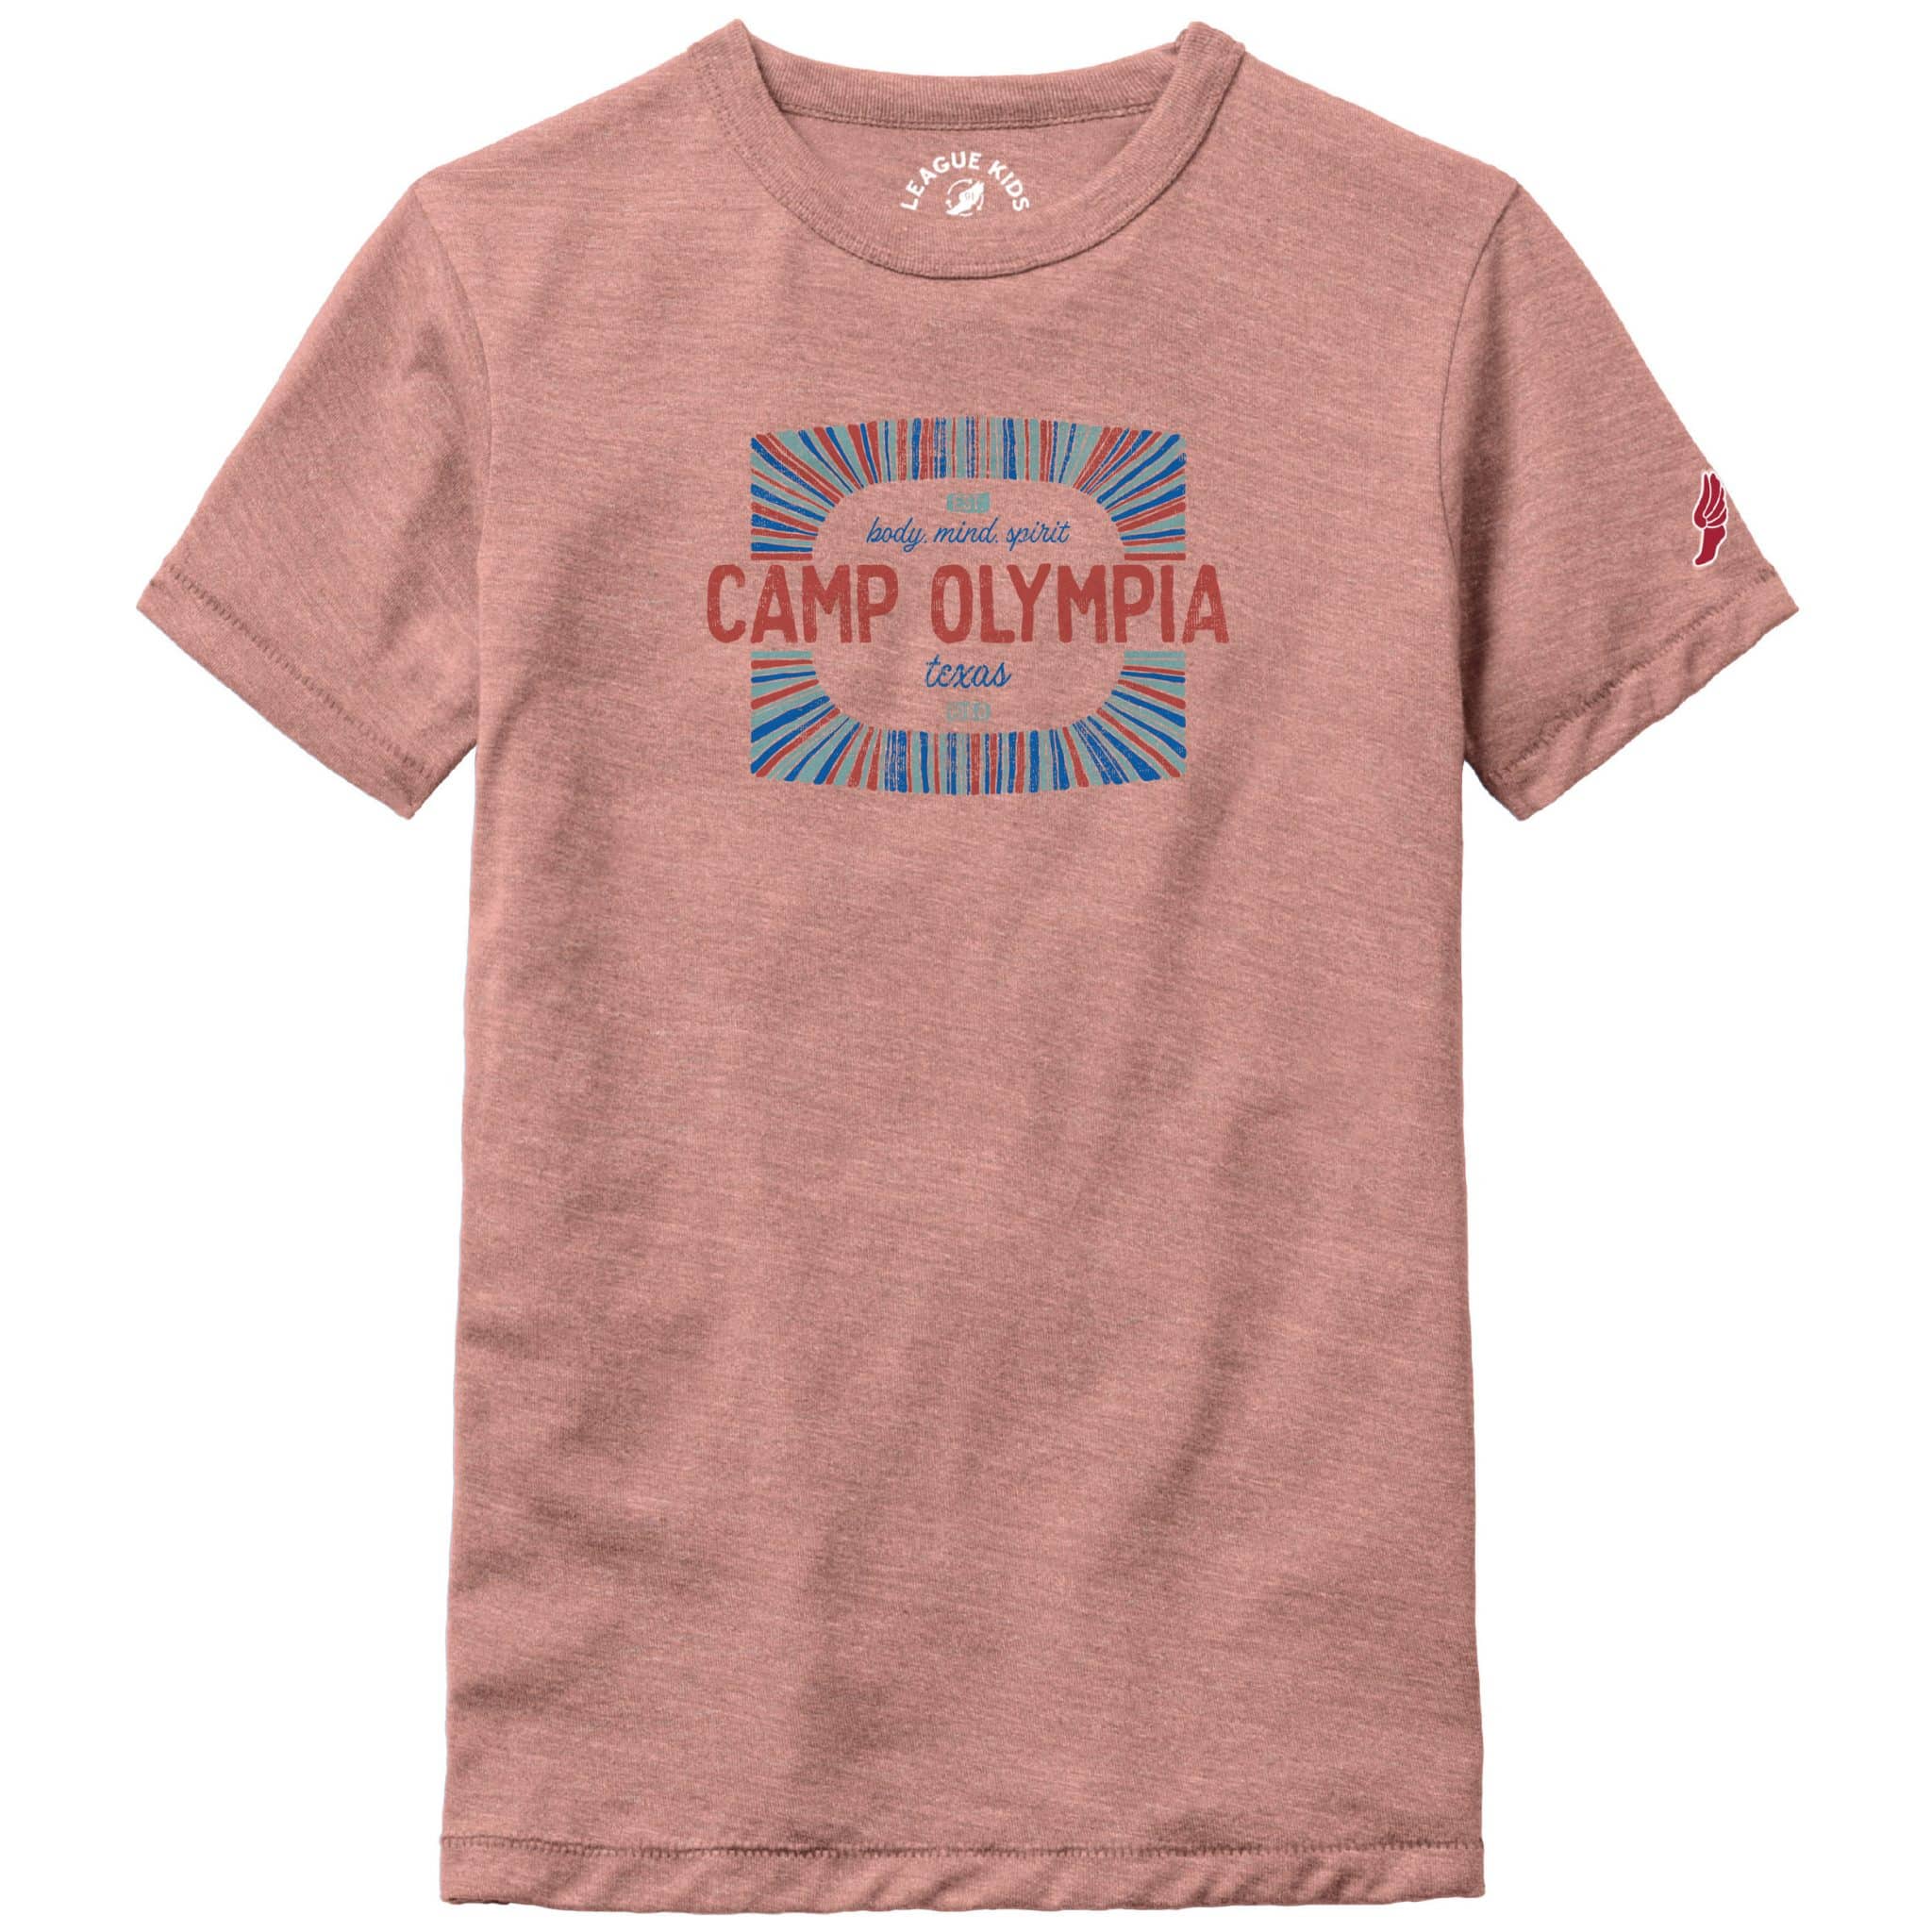 Camp Olympia T-Shirt Dusty Rose